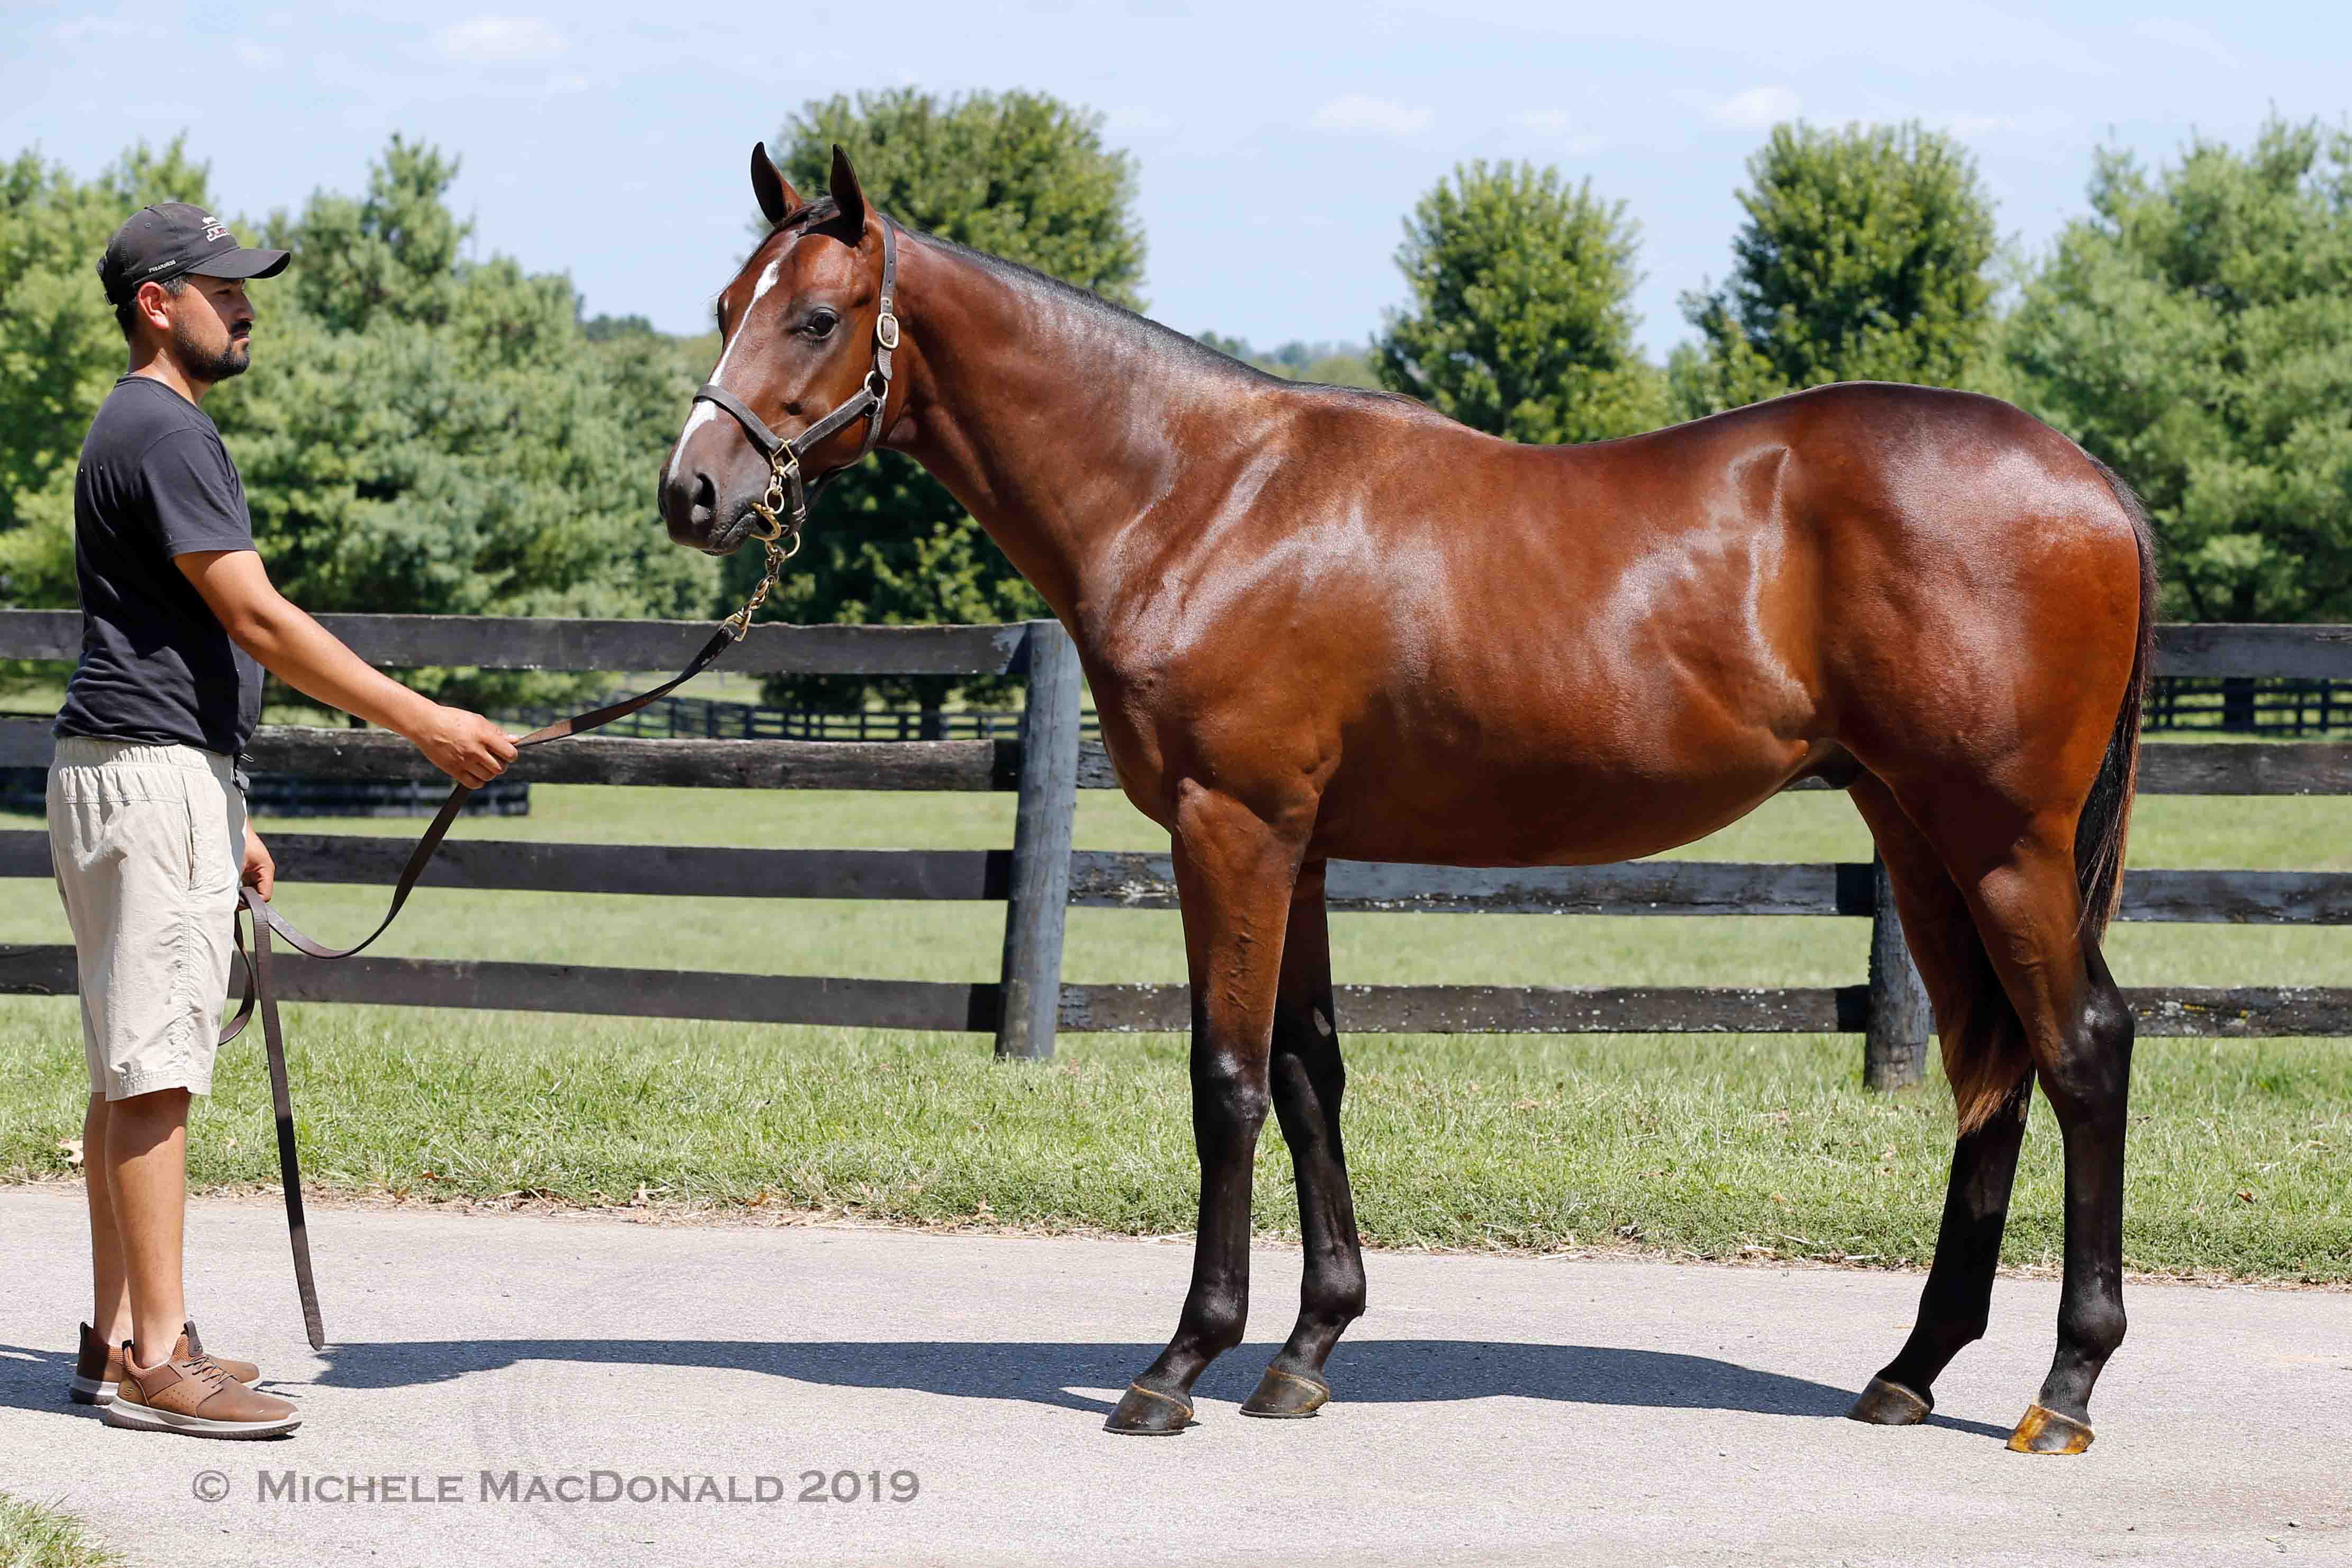 Sale star: this yearling colt is a half-brother to Justify by American Pharoah’s sire, and he’s up for auction at Keeneland tomorrow (Monday). Photo: Michele MacDonald